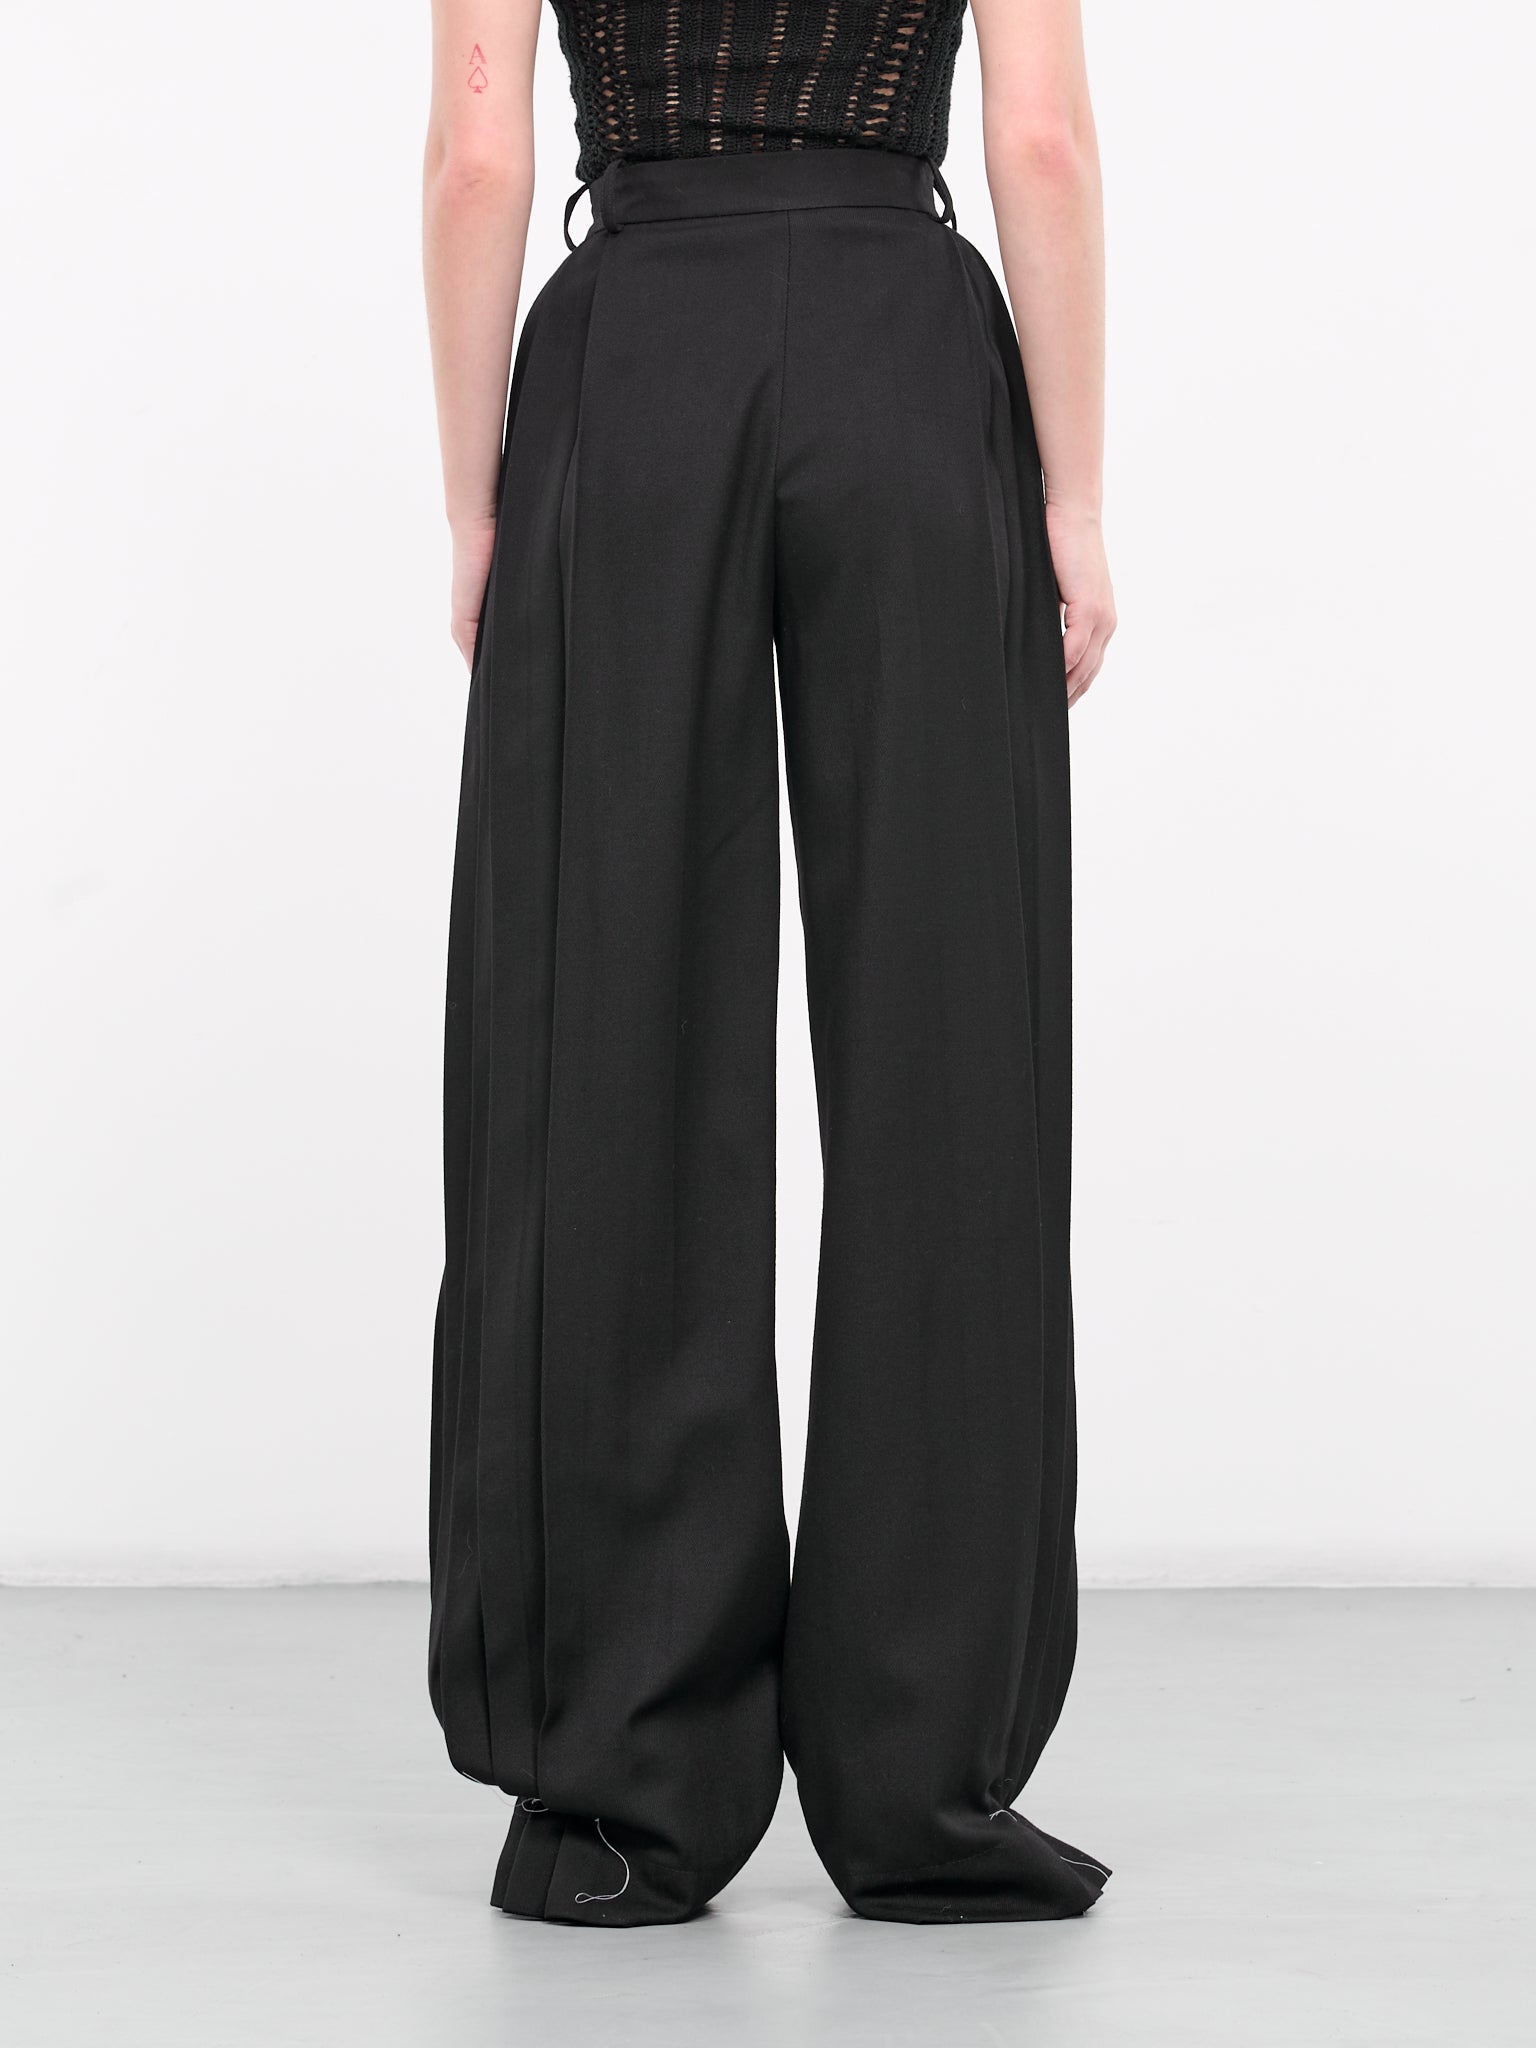 Pleated Trousers (UN-PAN-02-BLACK)